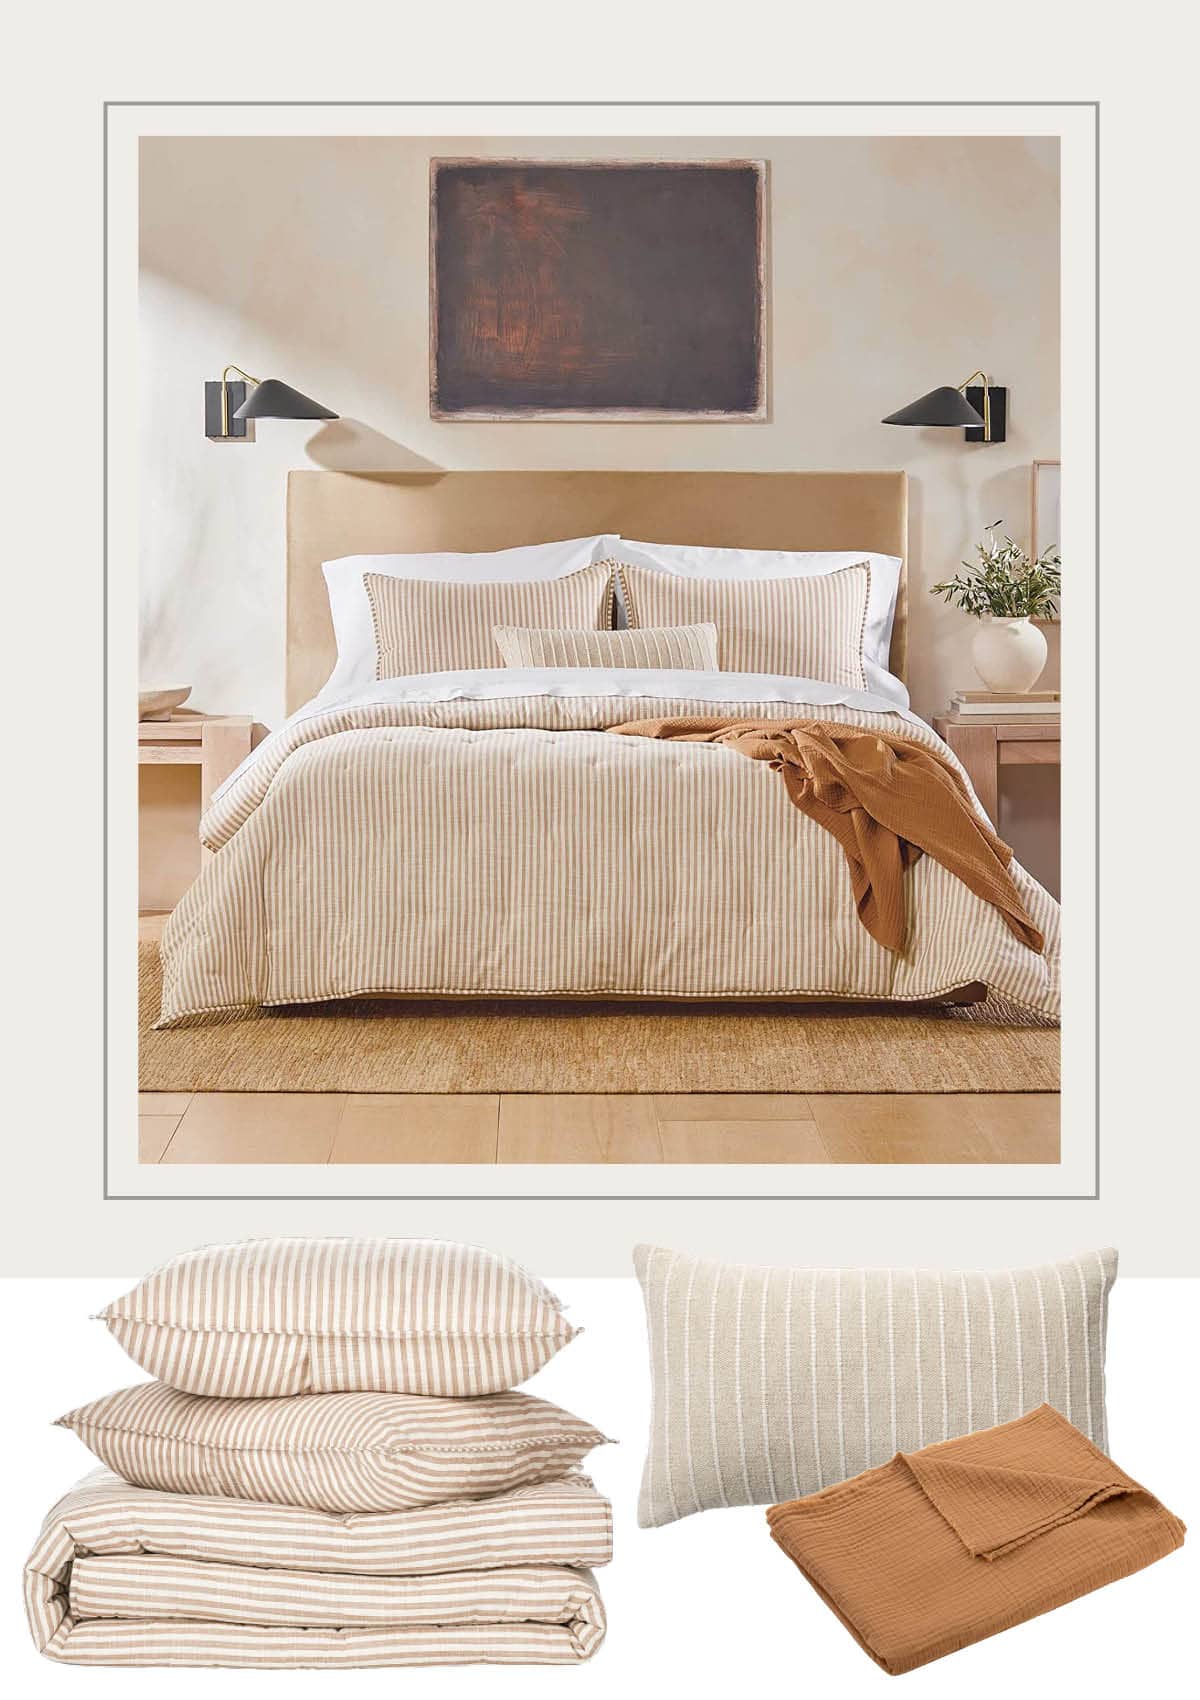 Nate Berkus Home Decor Bedroom Collection On Amazon - simple striped print in a camel tan color